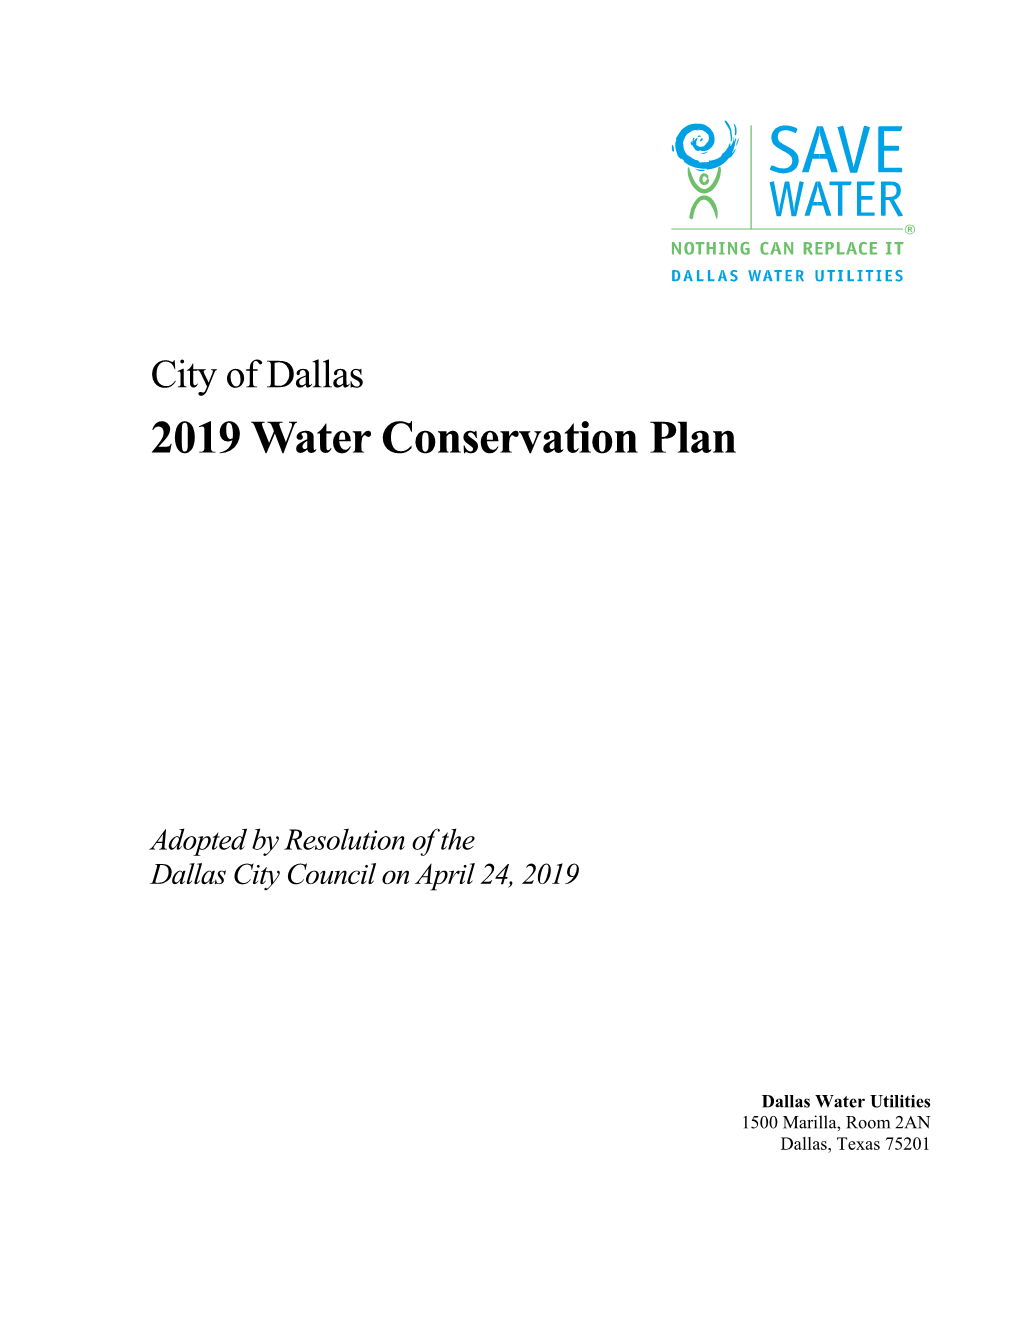 2019 Water Conservation Plan